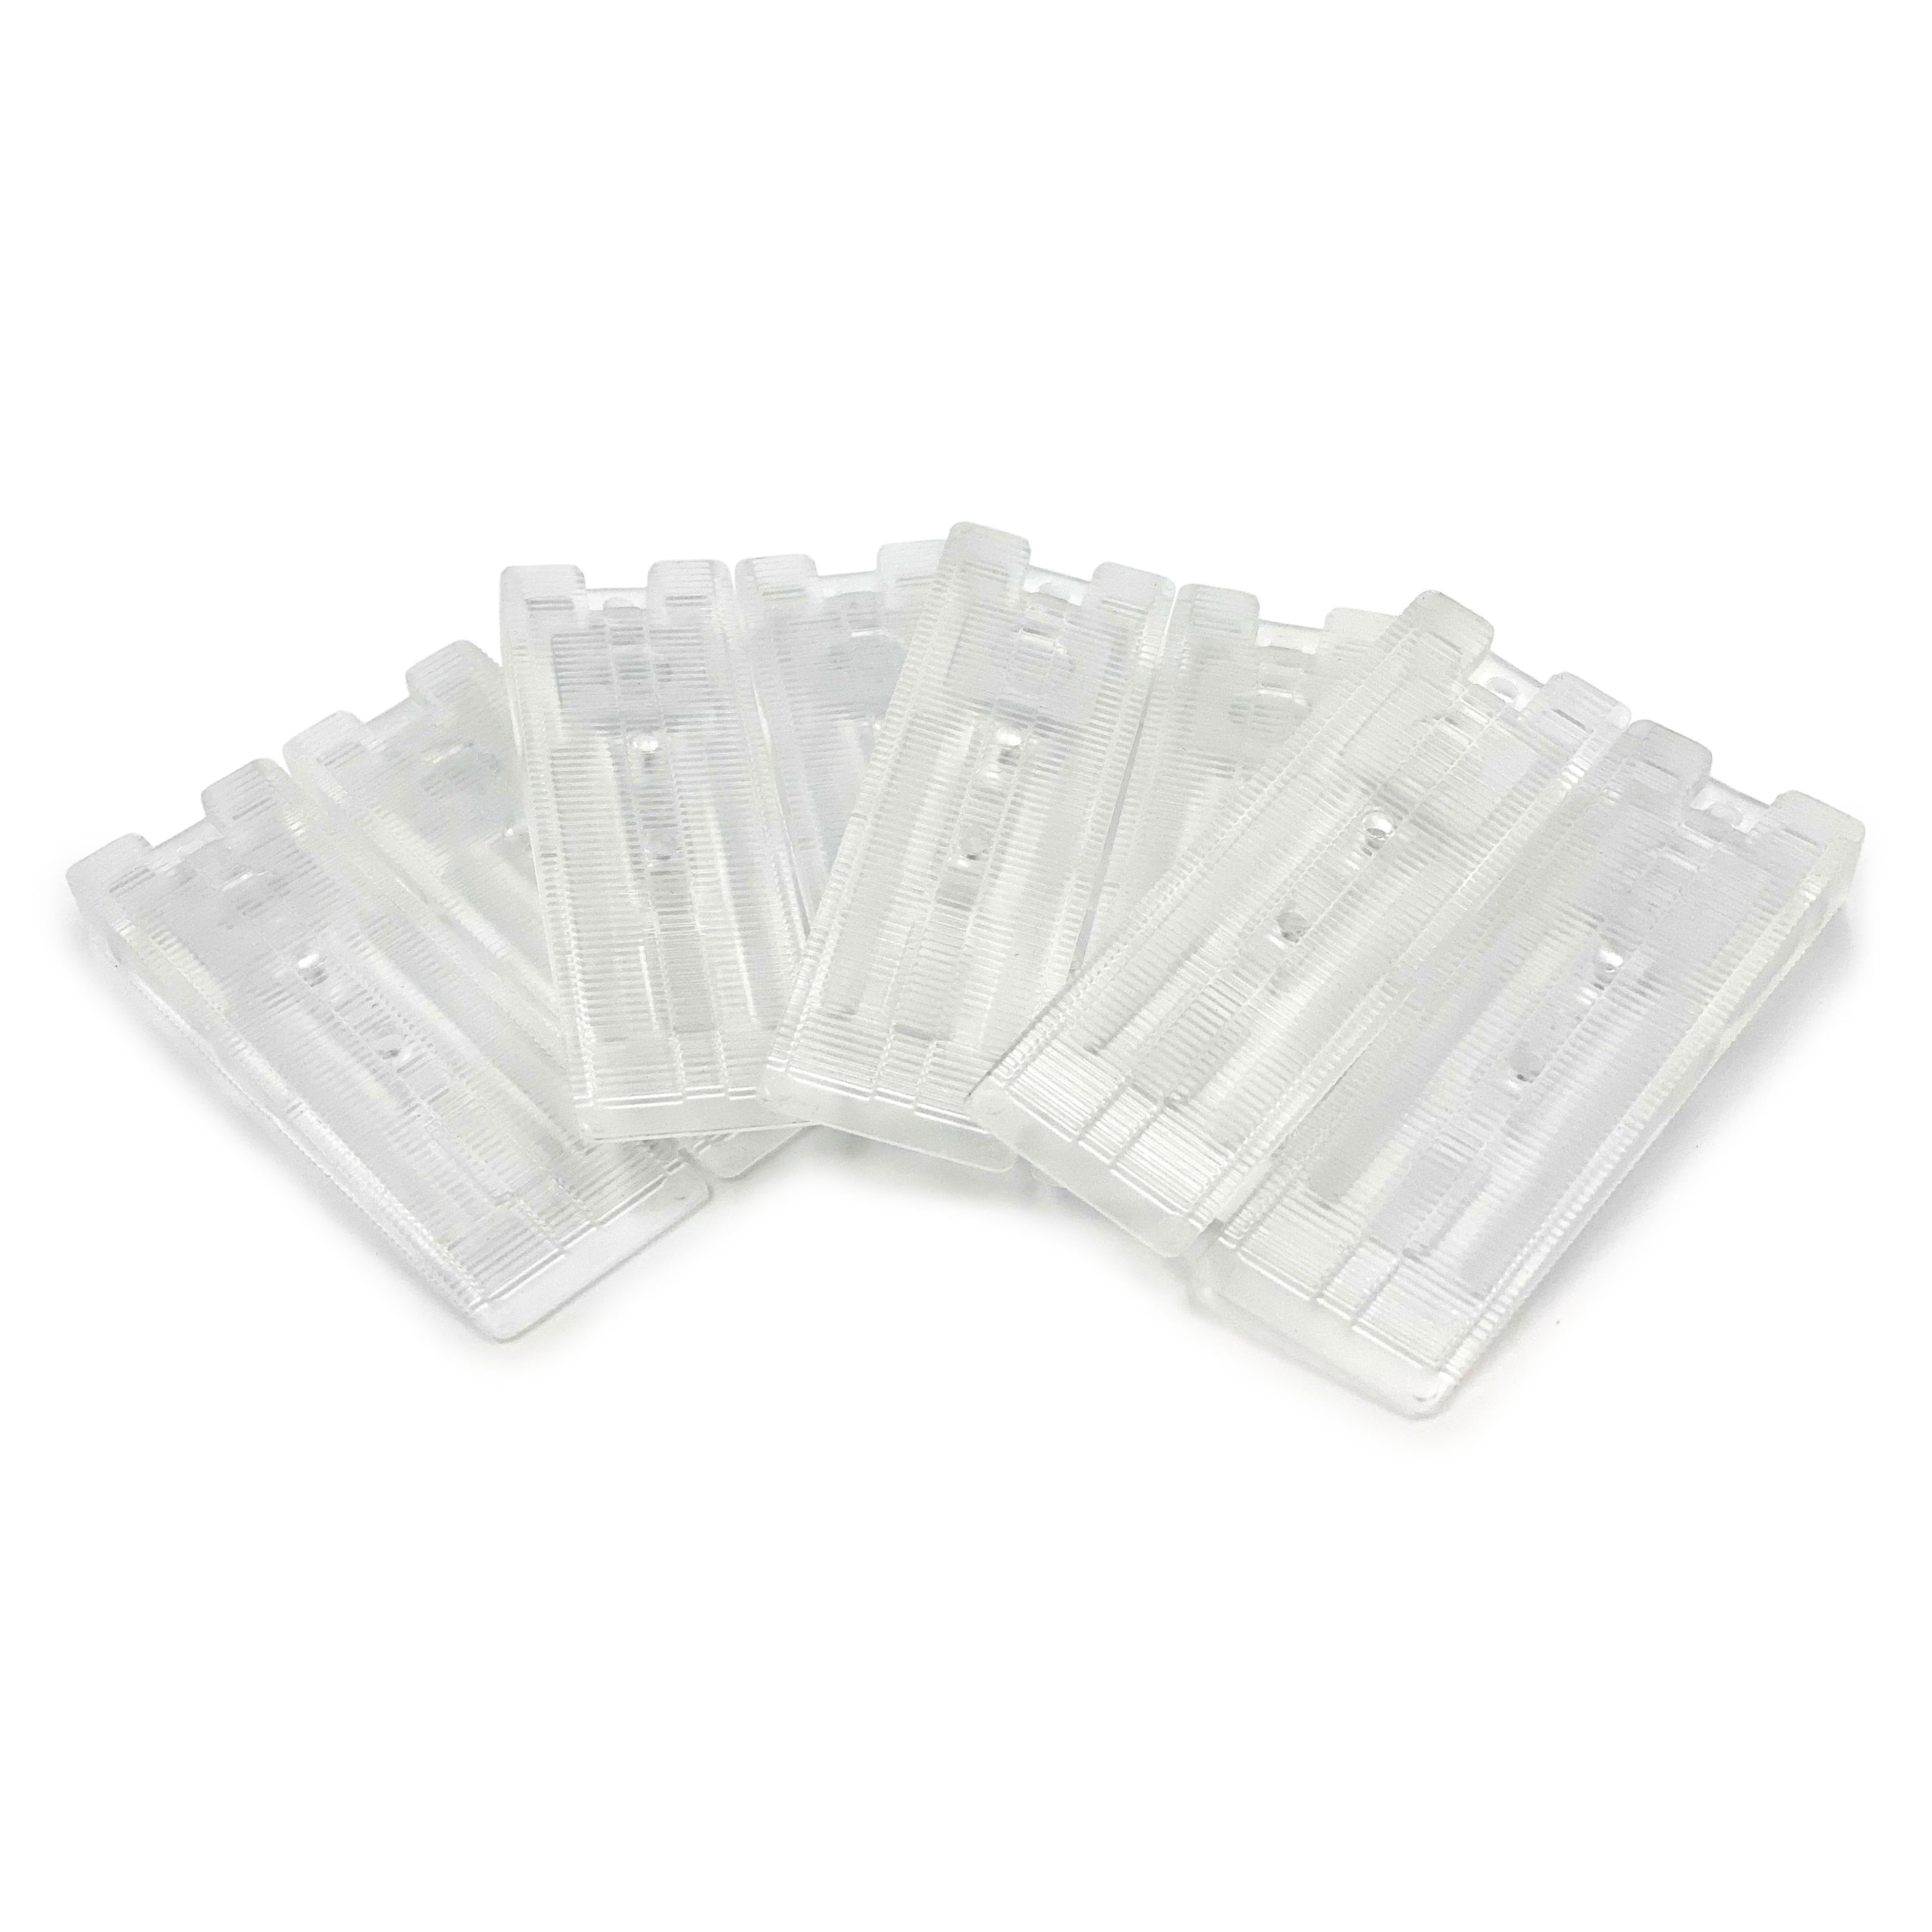 Leveling Shims For Tables/Chairs 12 Soft Plastic Clear Wobble Wedges 